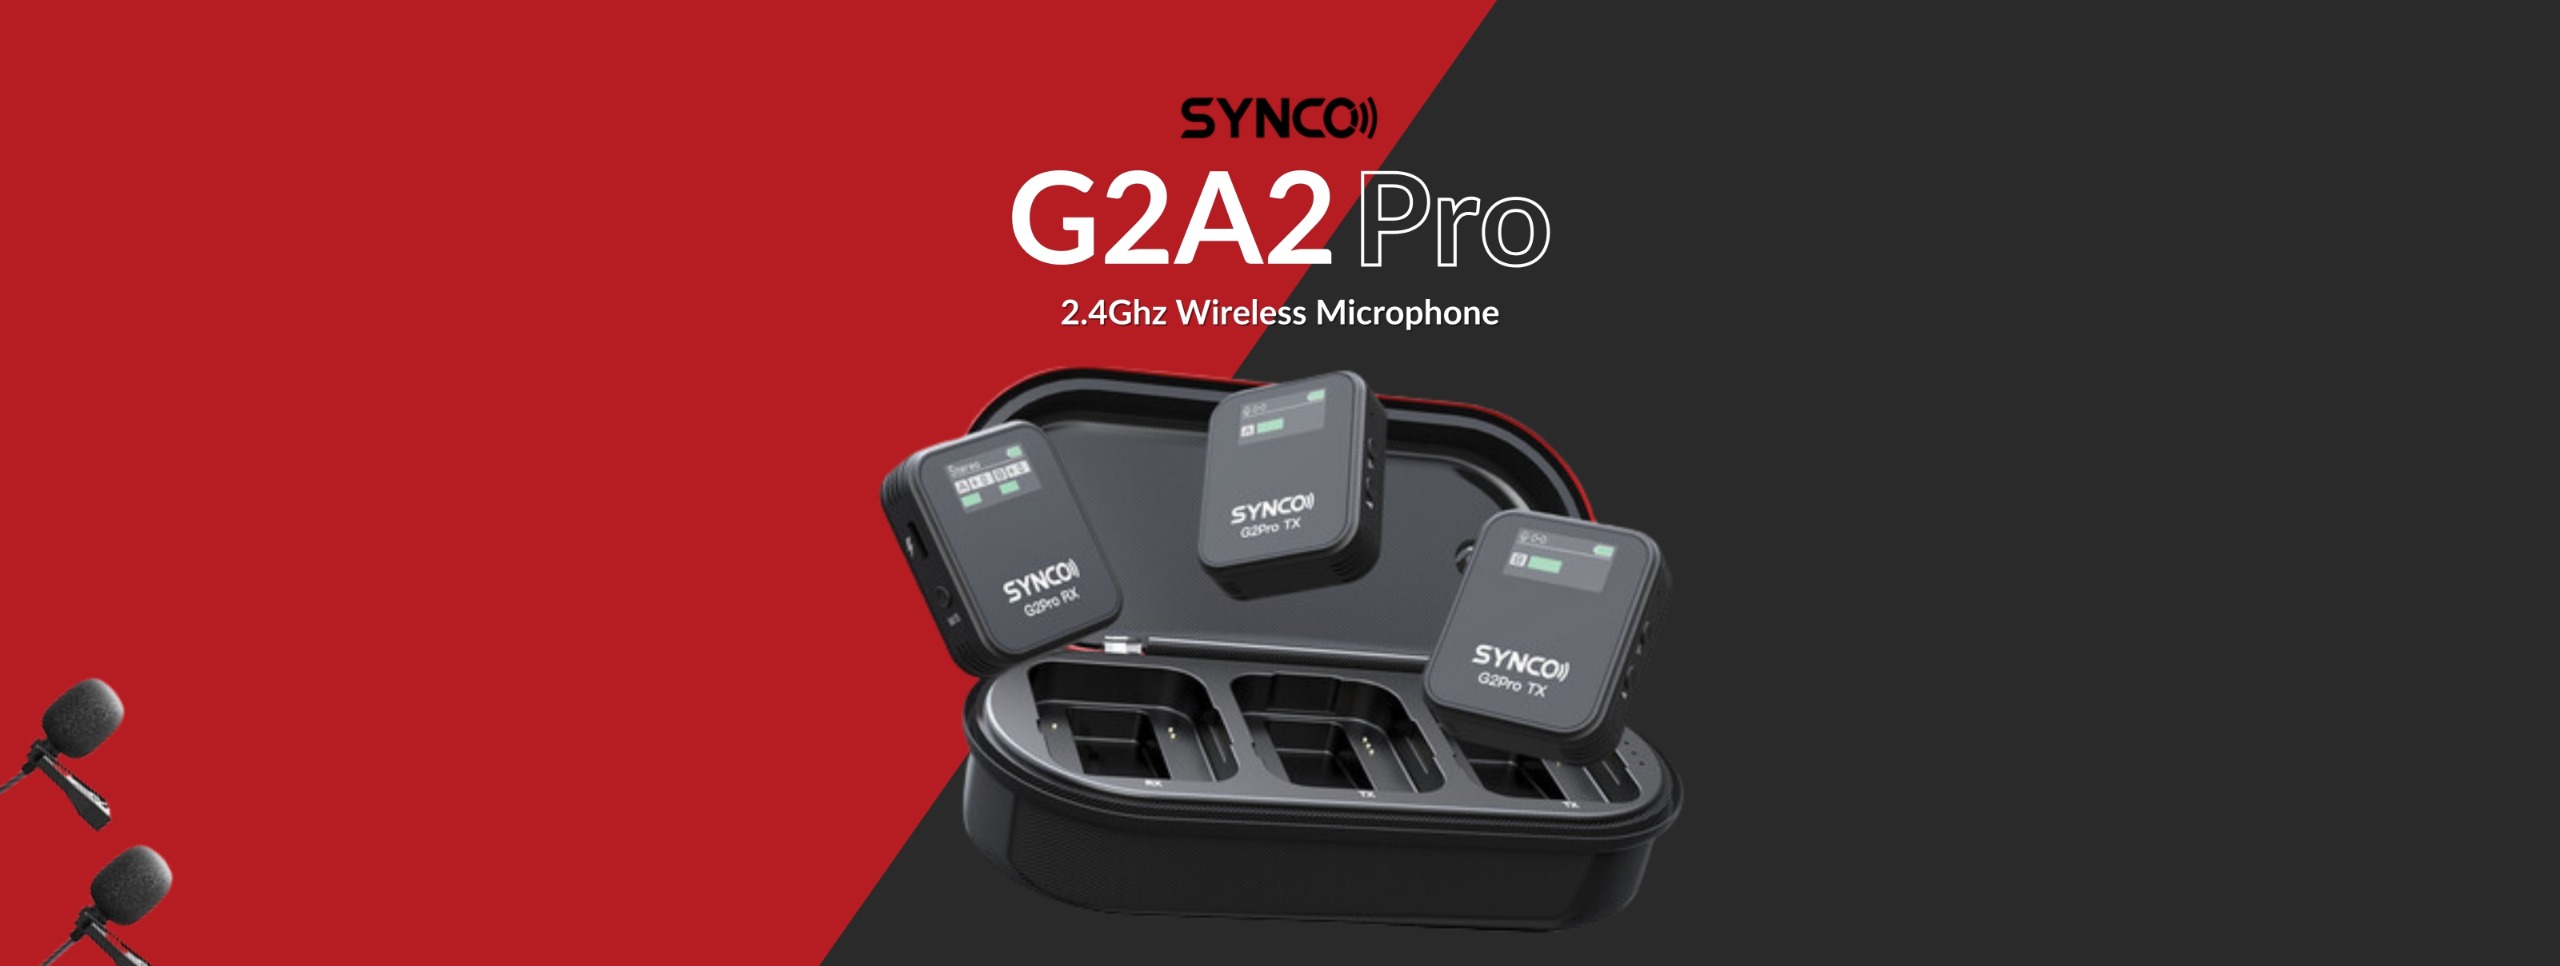 SYNCO G2A2 Pro Banner